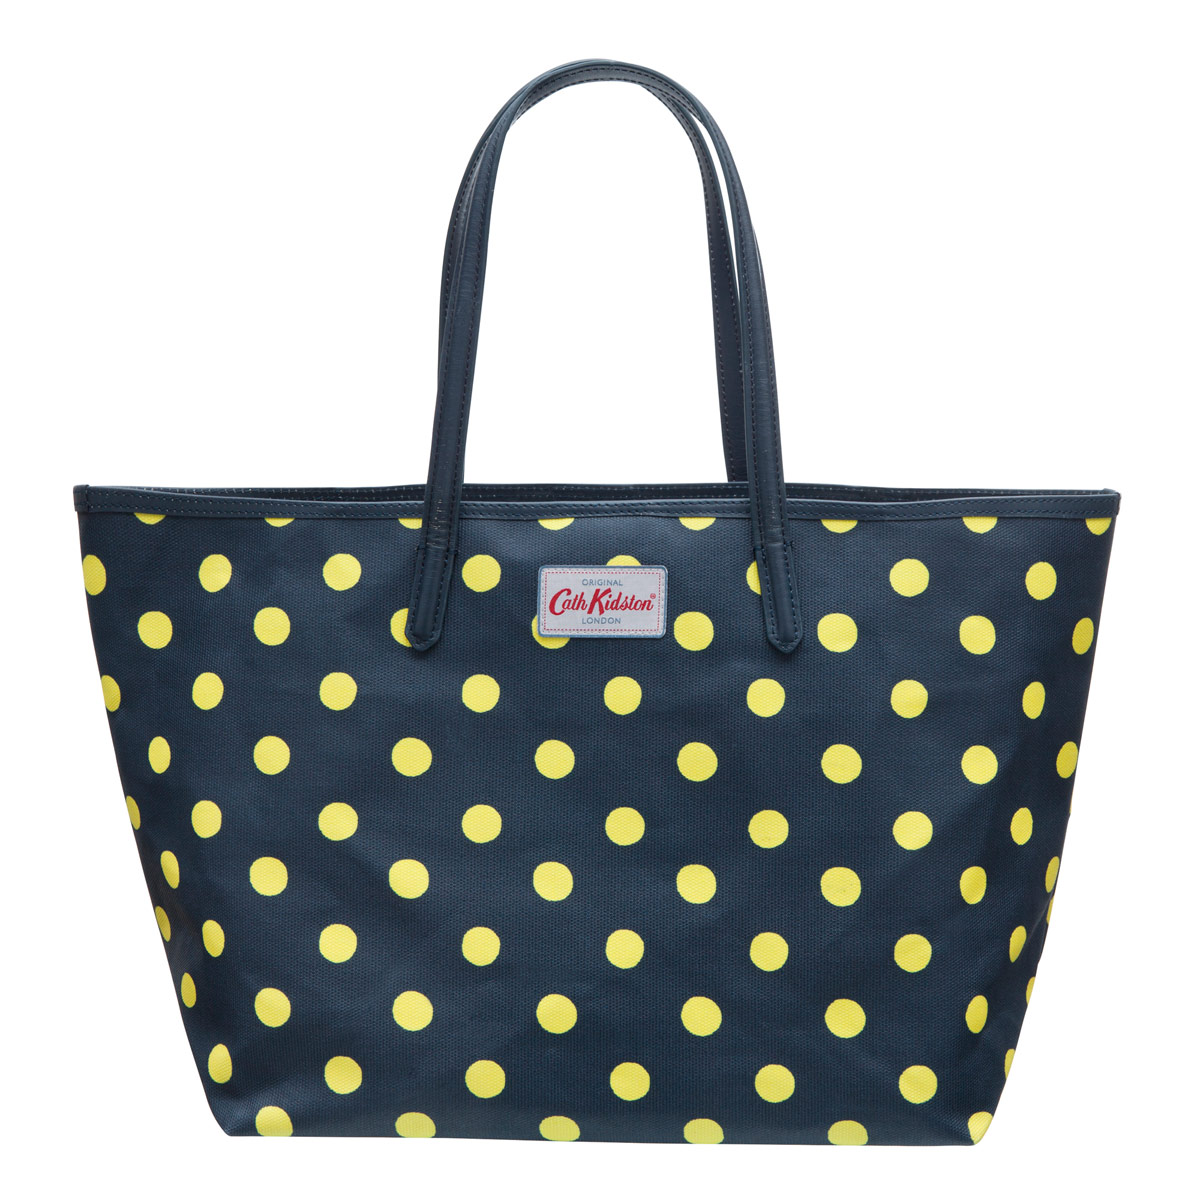 Neon Spot Tote by Cath Kidston